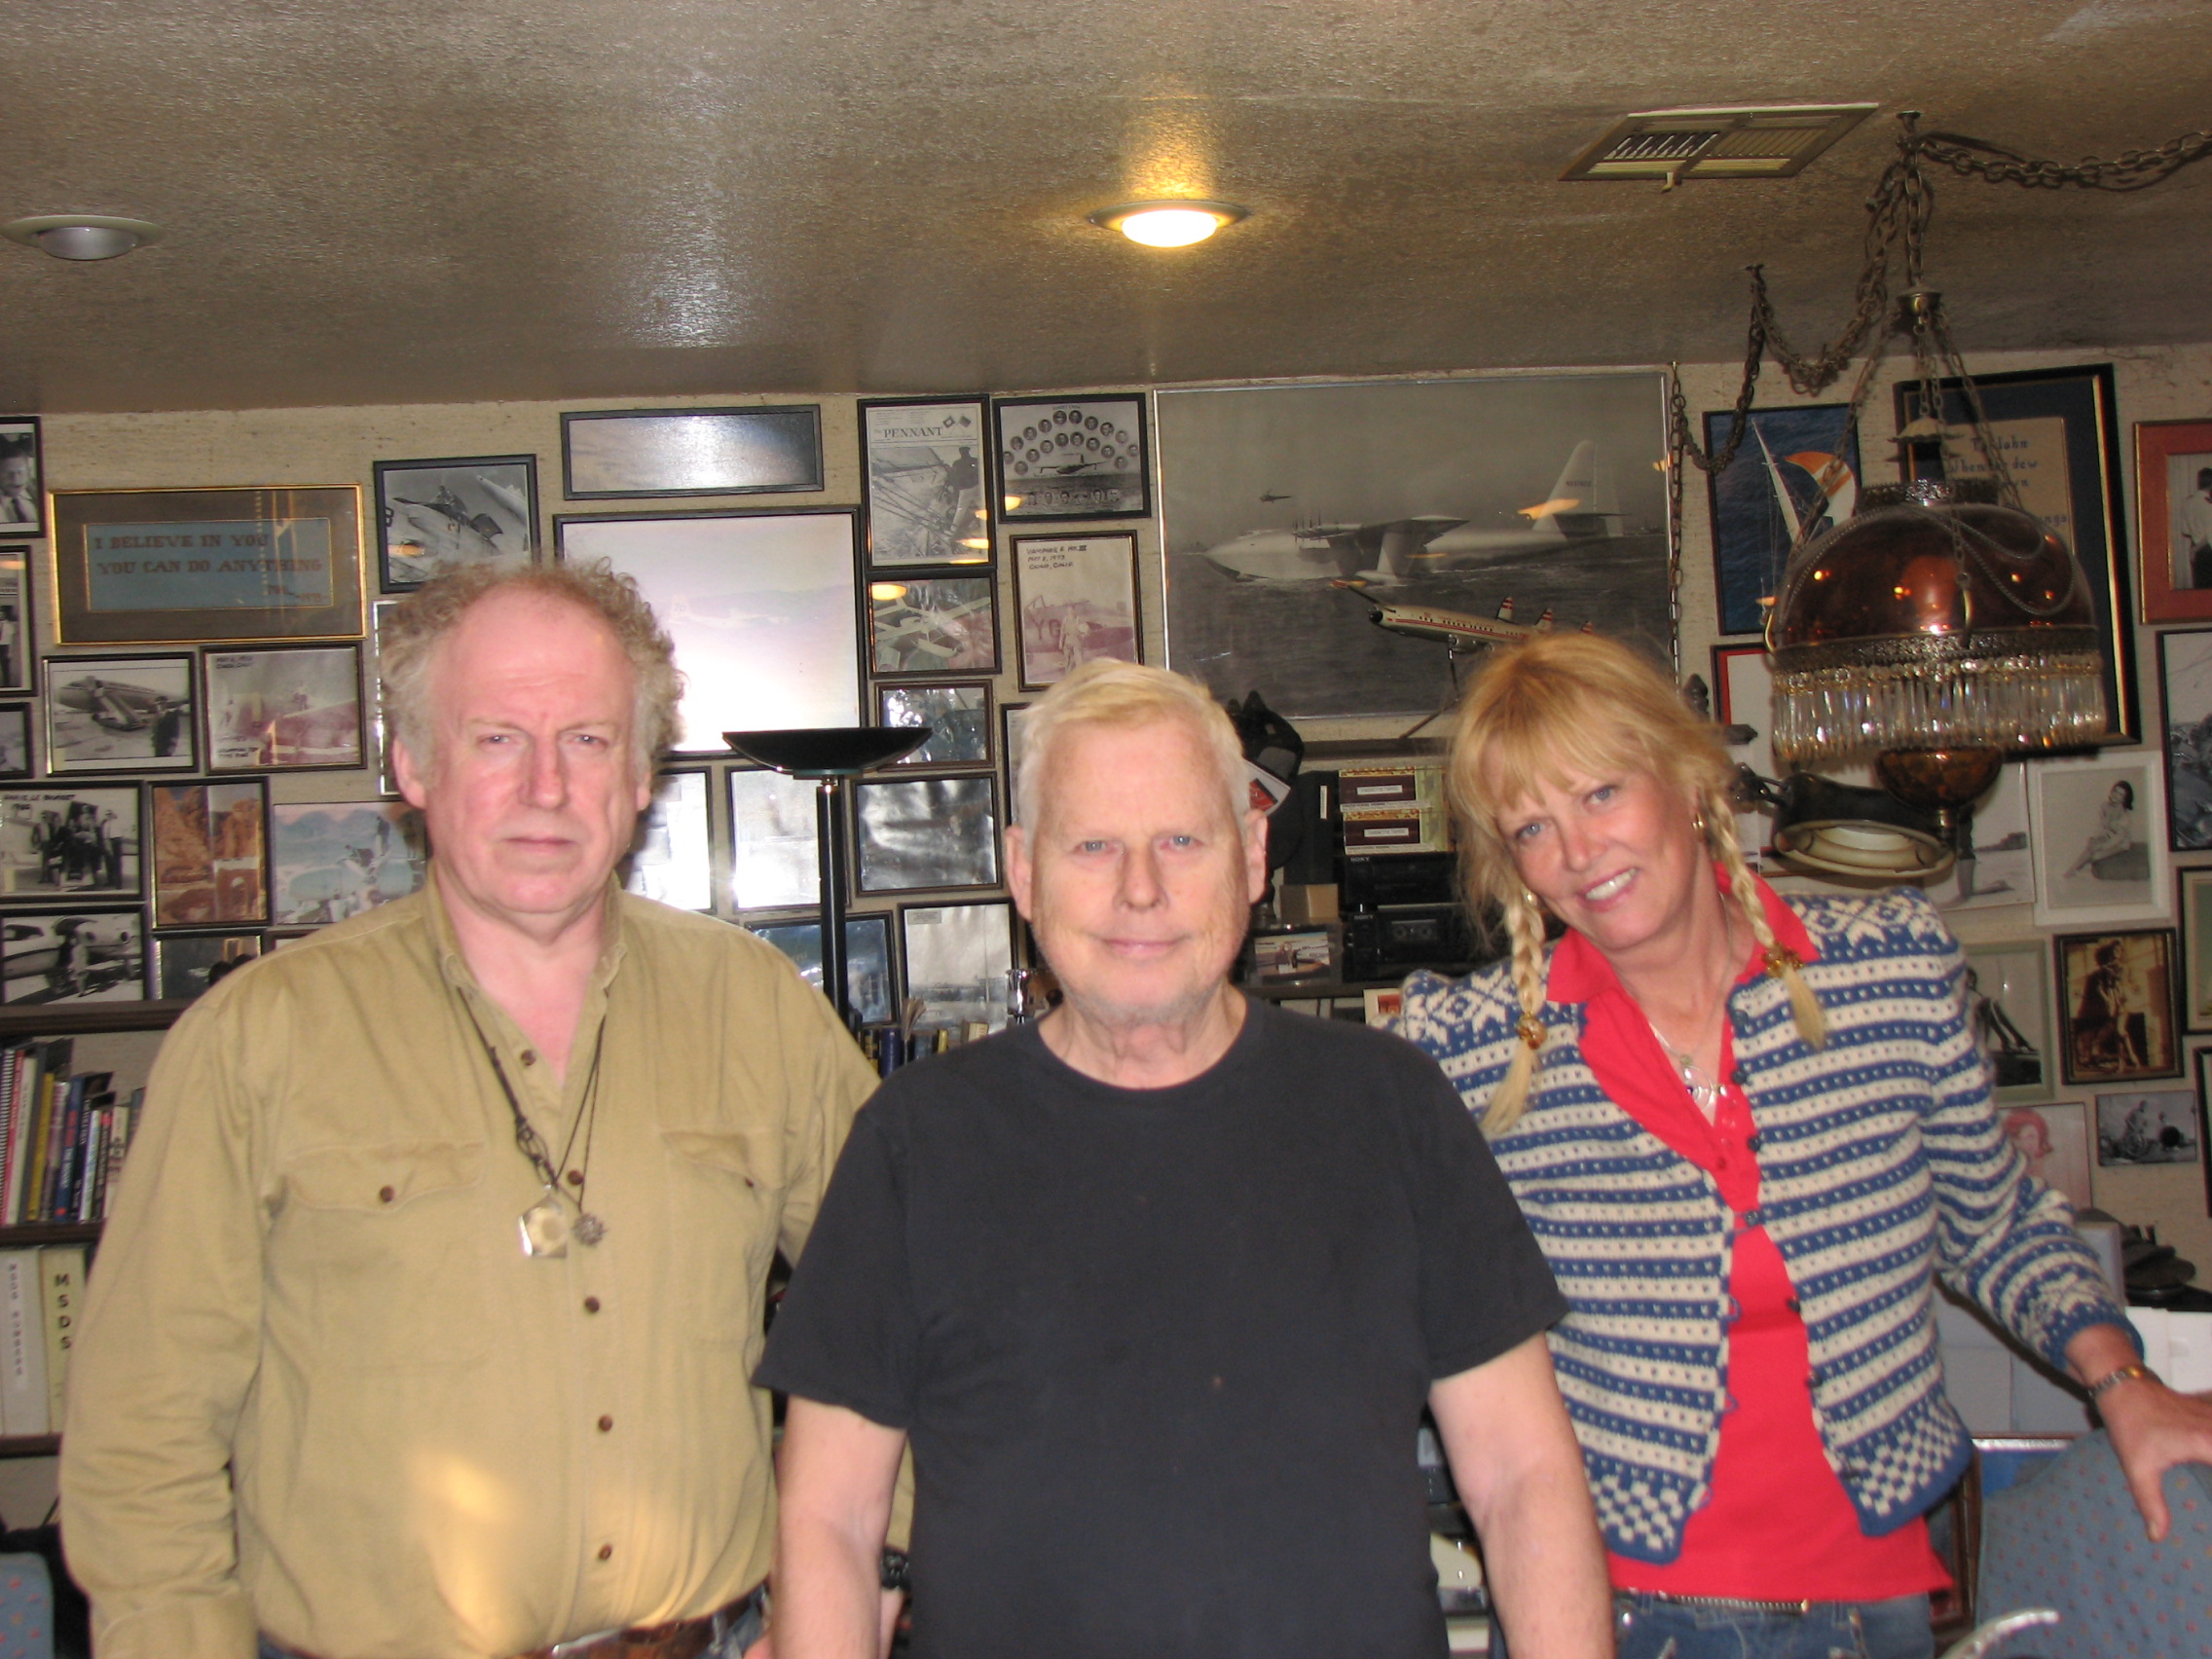 T Miles Johnston with John Lear and Anne Hess, taken during the 3 part Bases Project interviews at John Lears Lair, in Las Vegas in Feb 2012